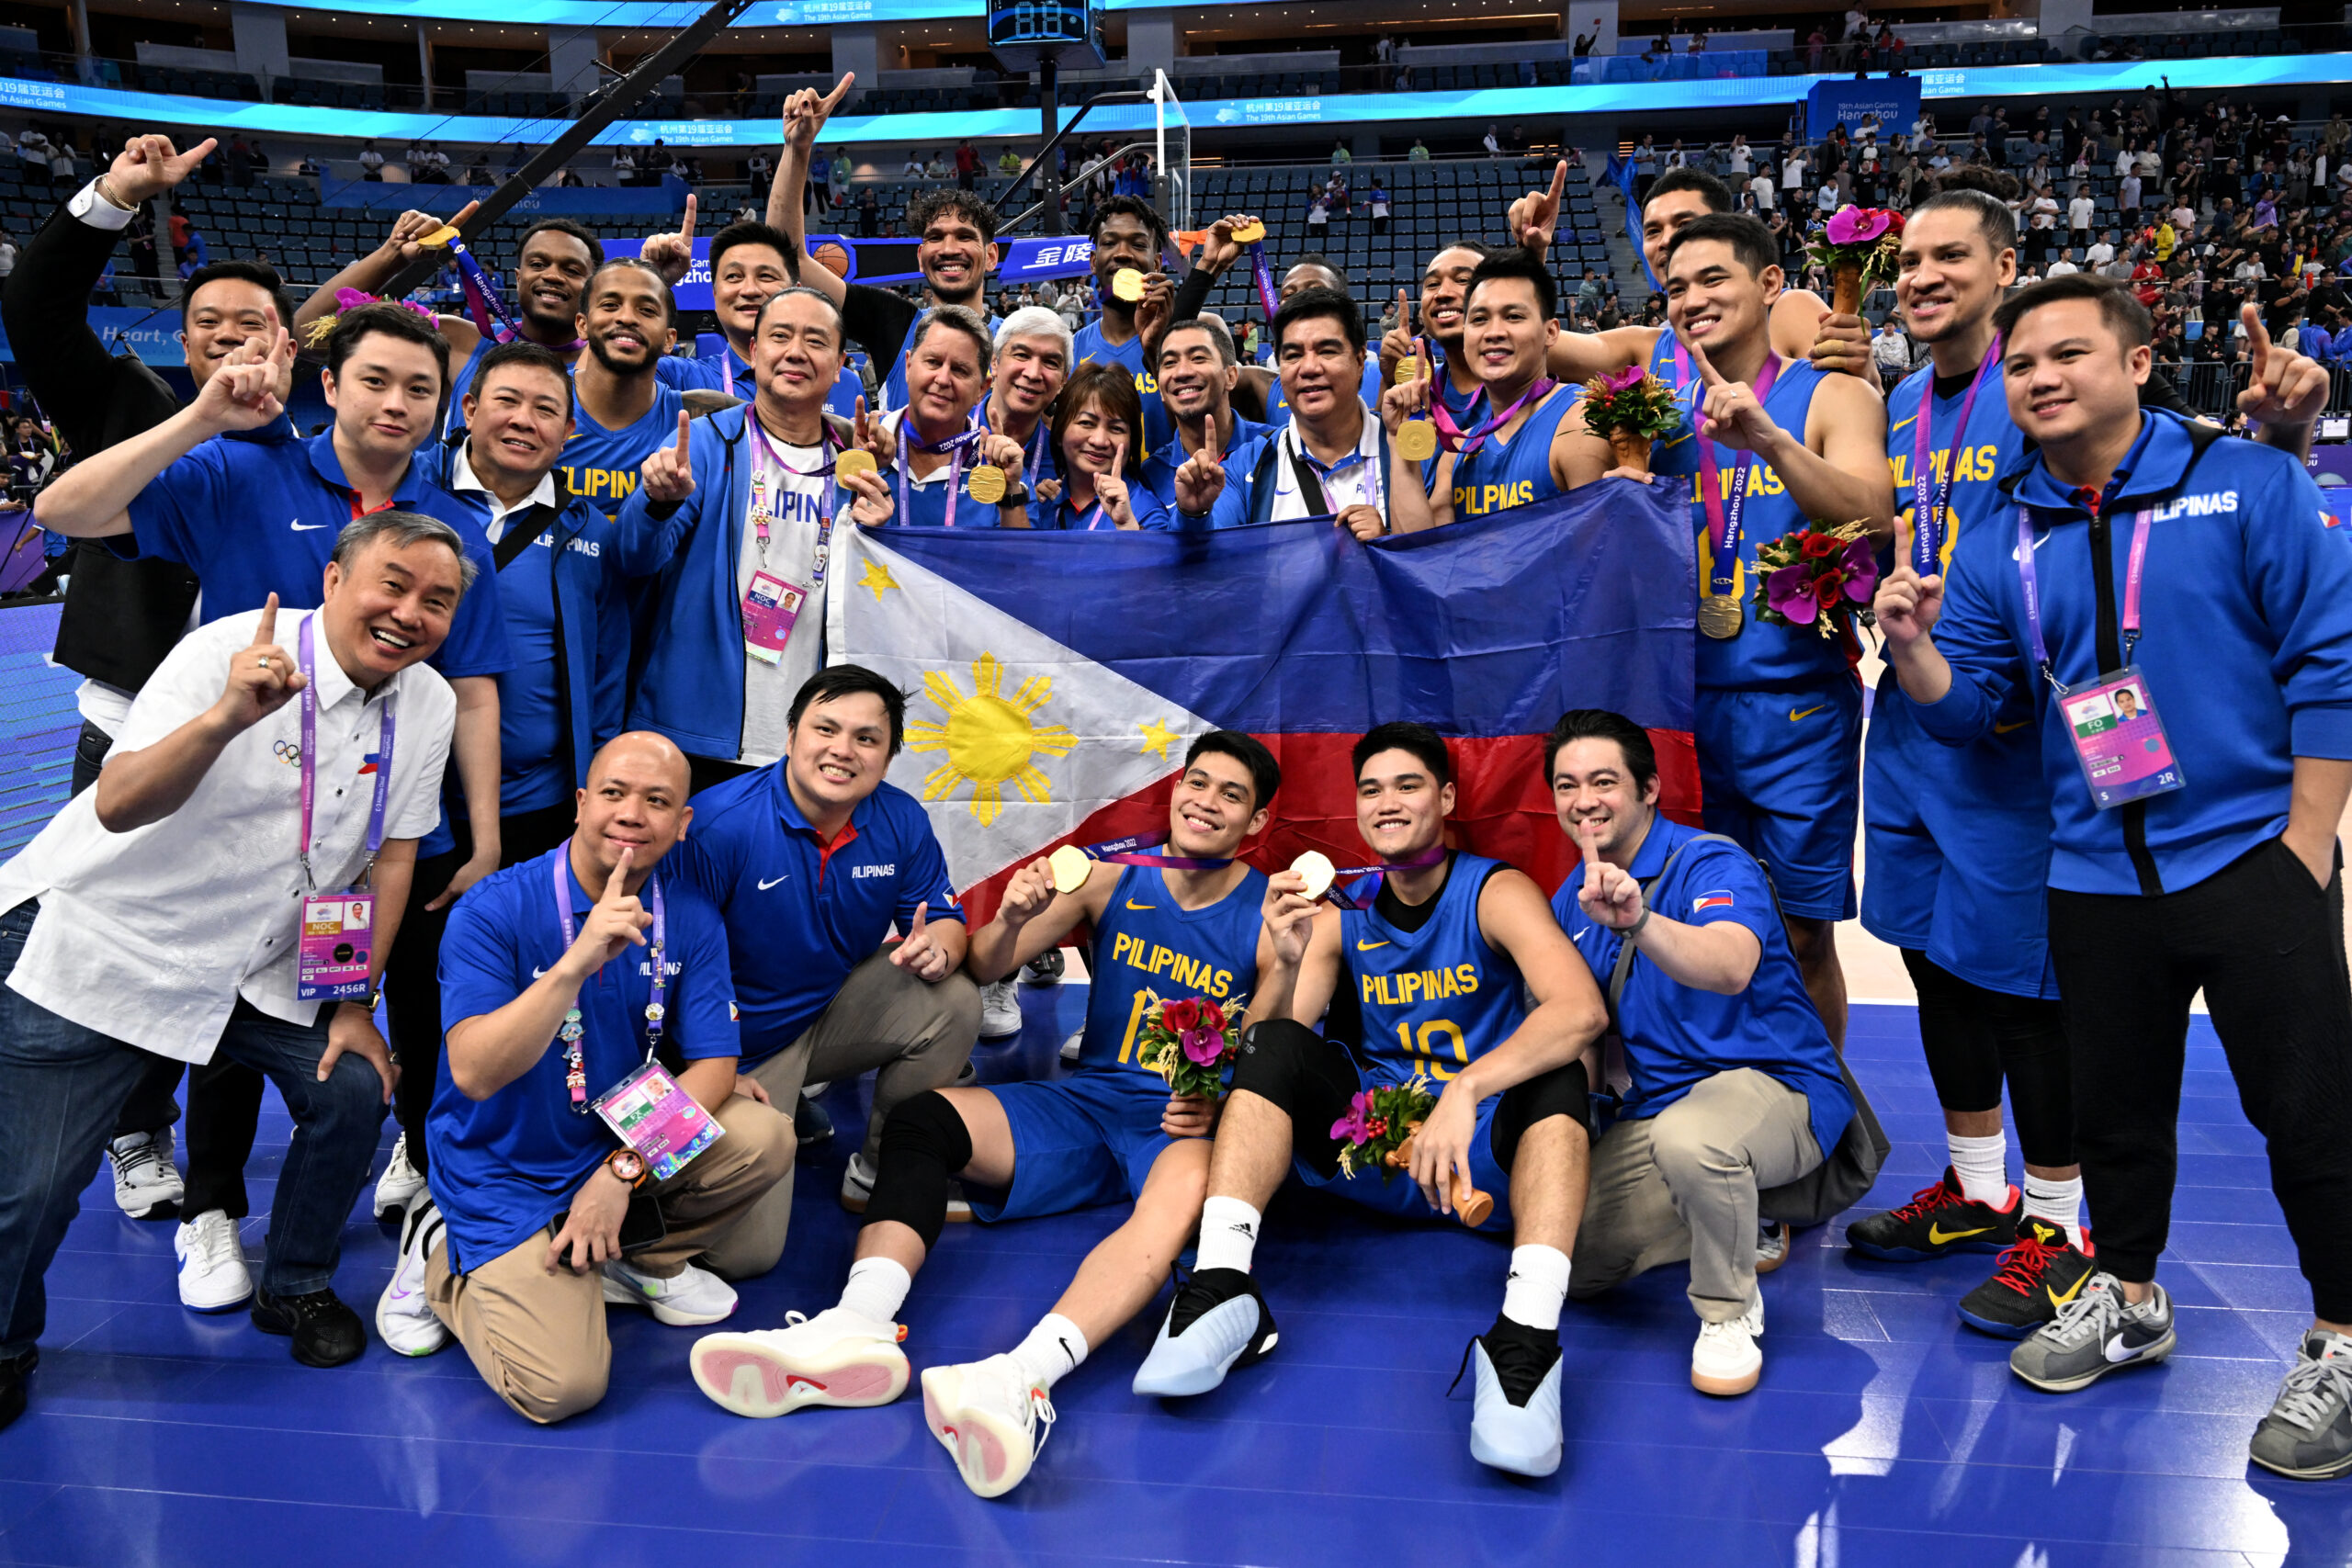 This picture will accompany a story that will be retold for years to come, one Tim Cone and the Philippine national team got to write in the Asian Games.